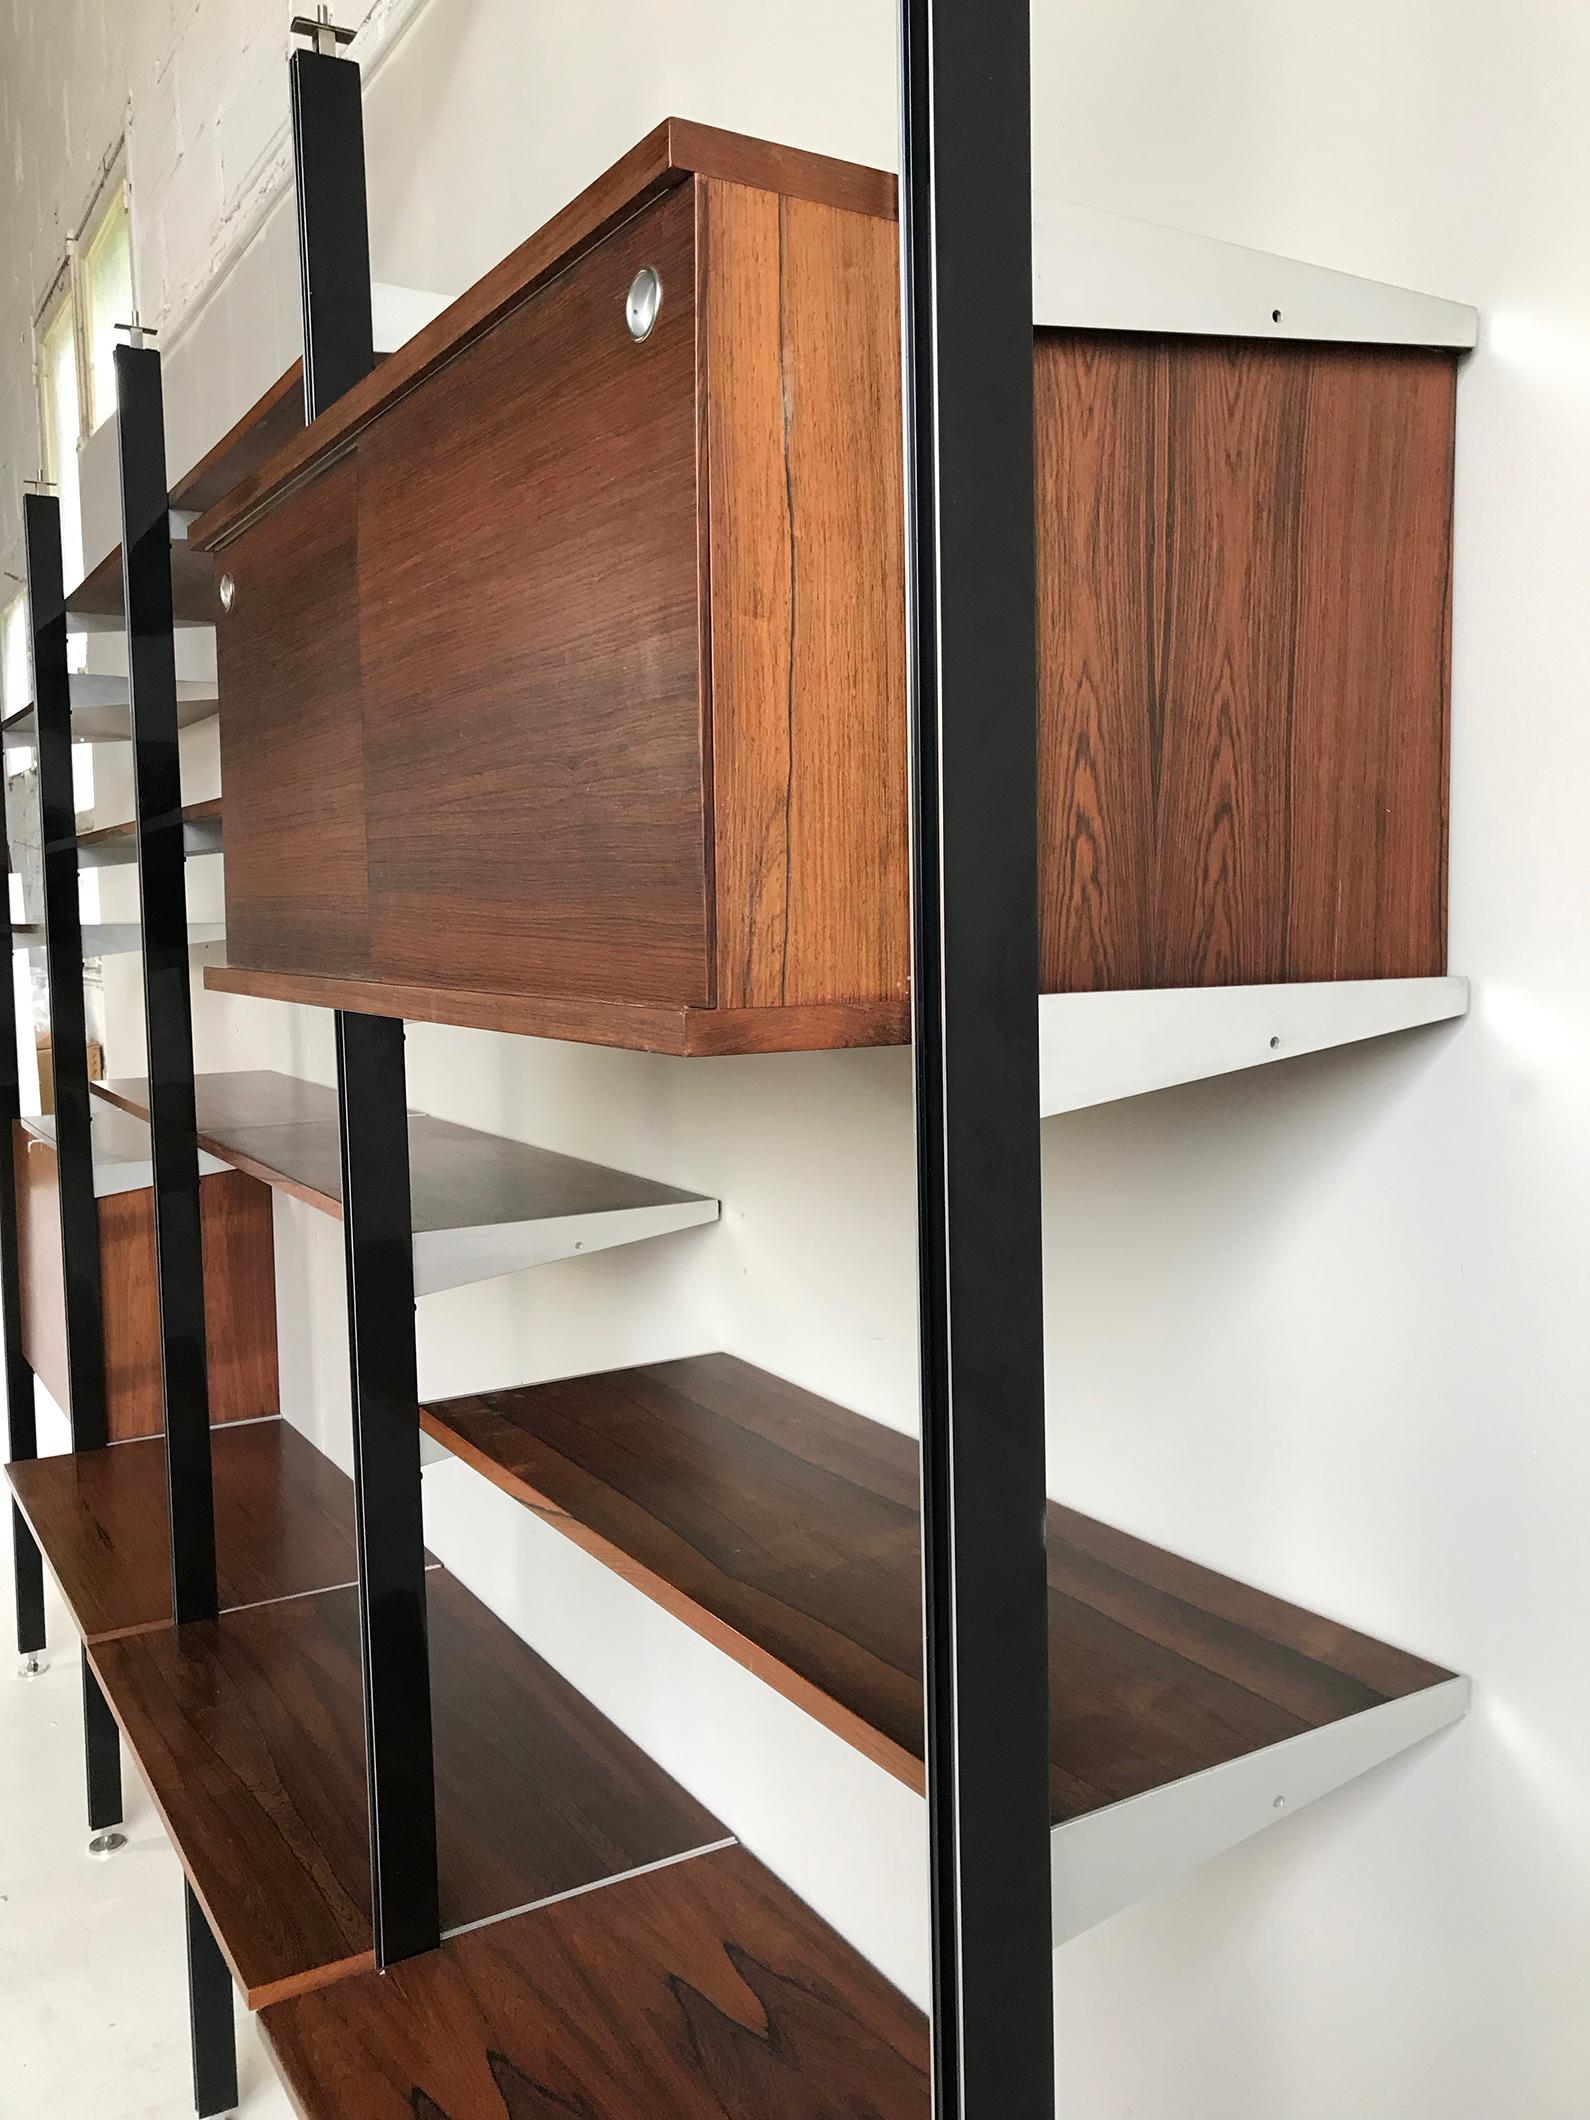 CSS modular bookcase in rosewood, floor / ceiling version by George Nelson for Mobilier International, 1960s.
She can position against a wall or clautra.
It consists of:
- 5 polished black poles,
- 14 shelves (D 30.5 cm / L 85.5 cm)
- 3 shelves